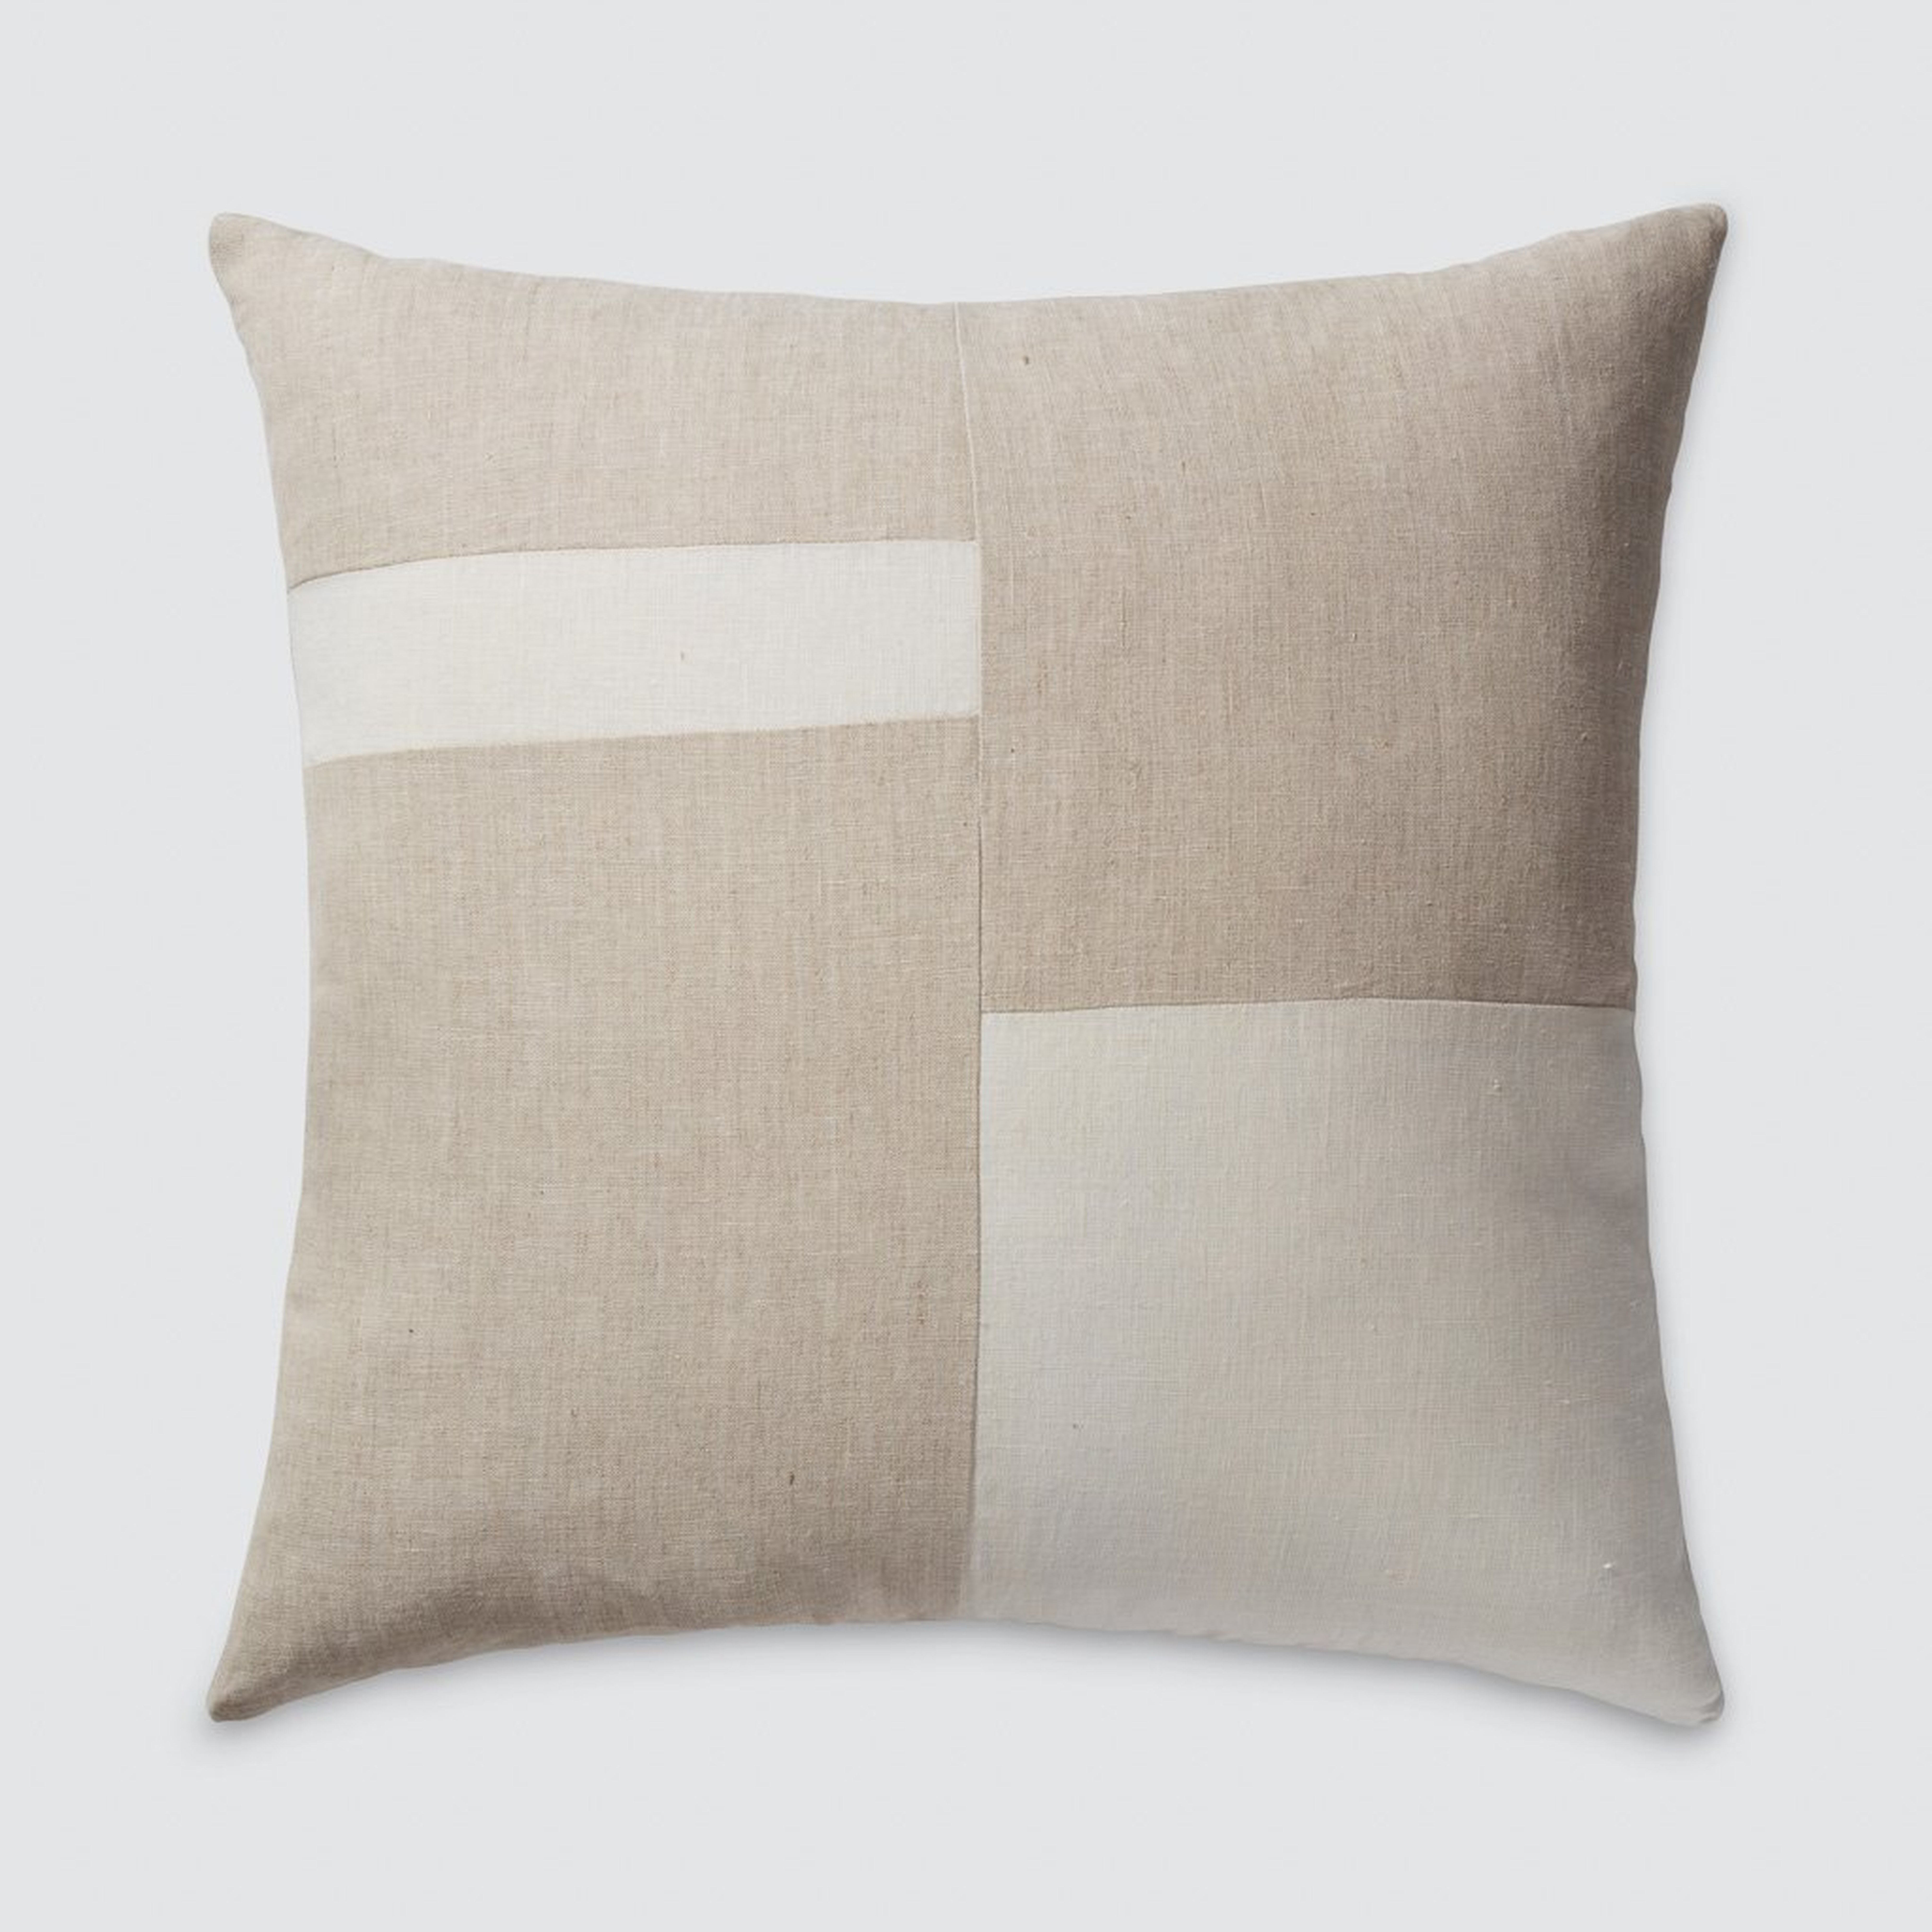 Samaya Pillow By The Citizenry - The Citizenry